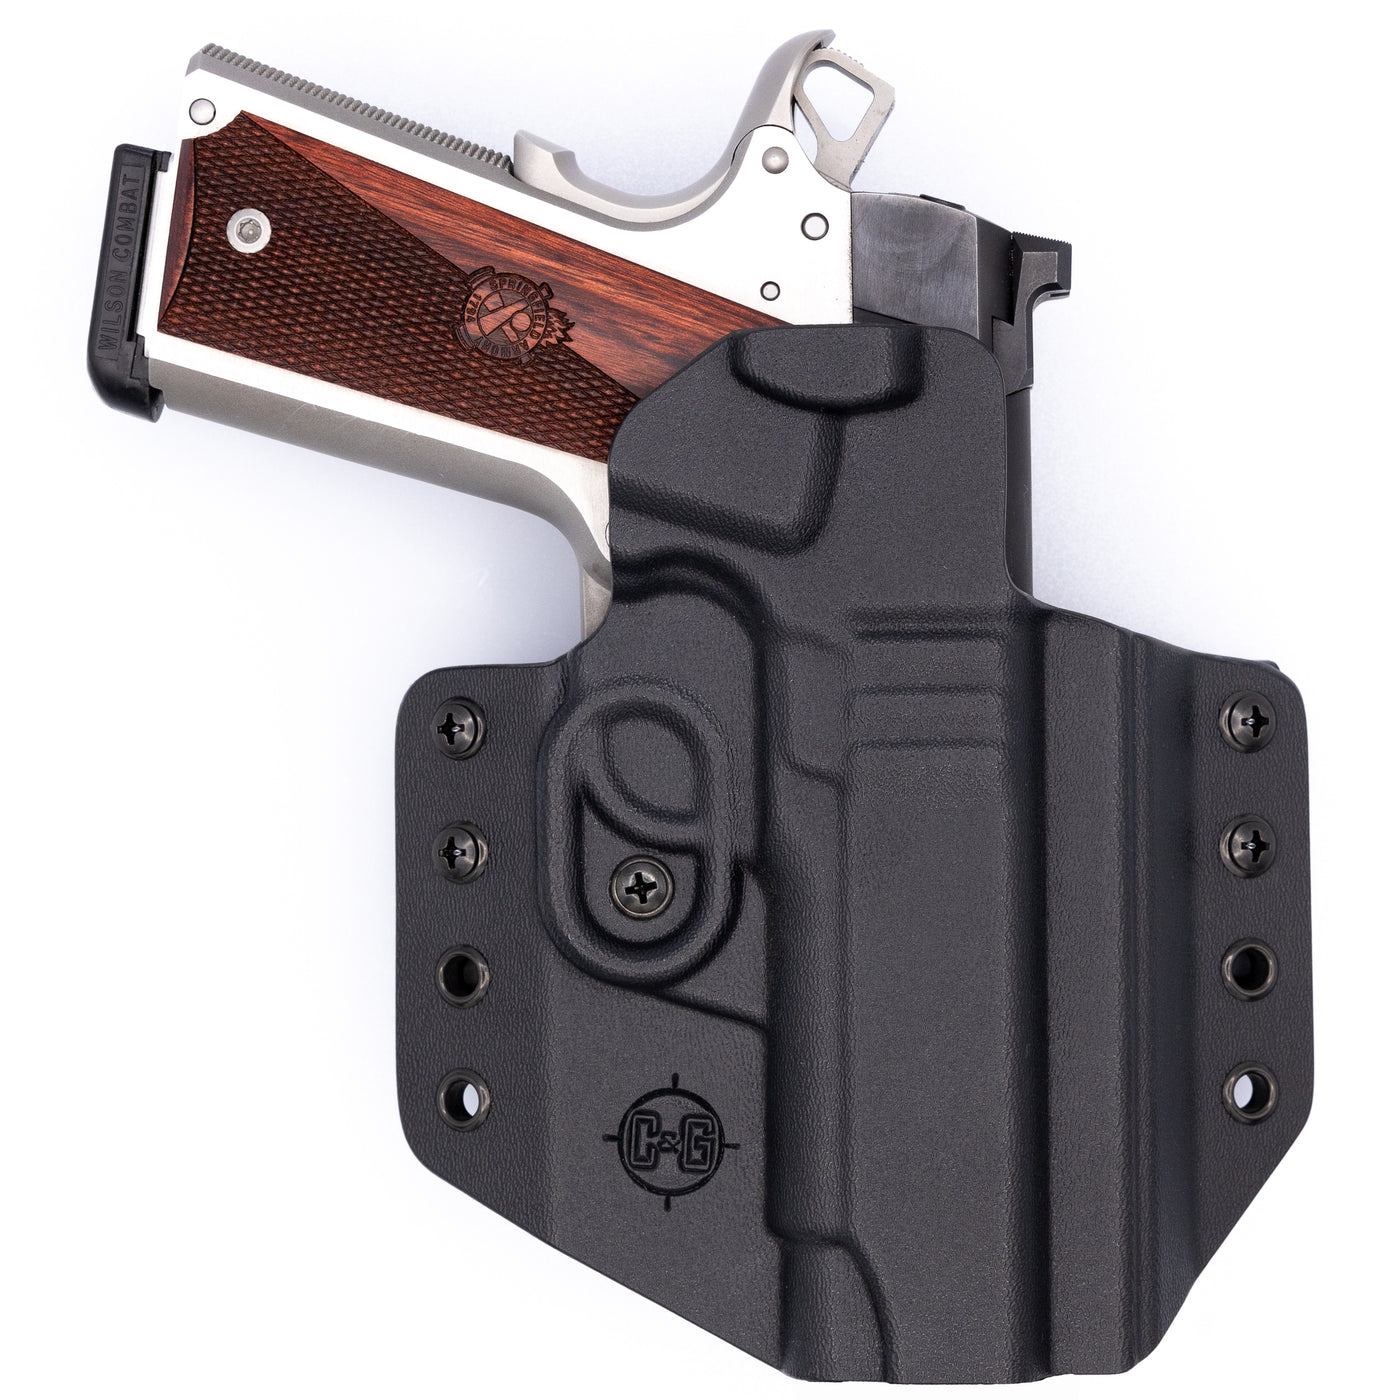 This is custom C&G Holsters OWB Outside the waistband Holster for the Kimber Pro Covert 1911.